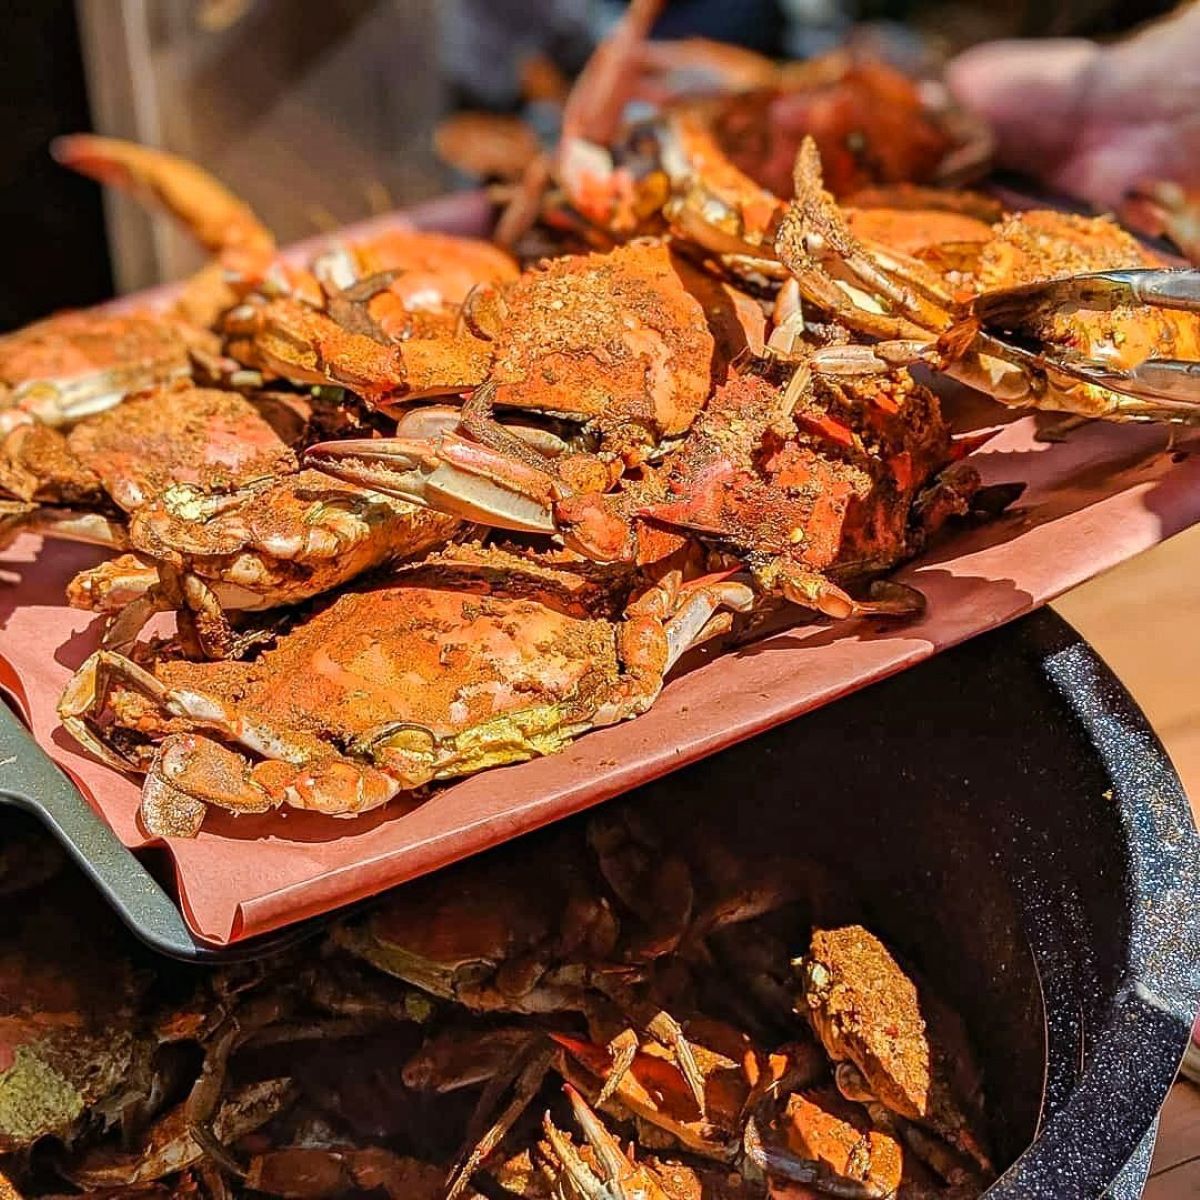 How To Store Steamed Crabs